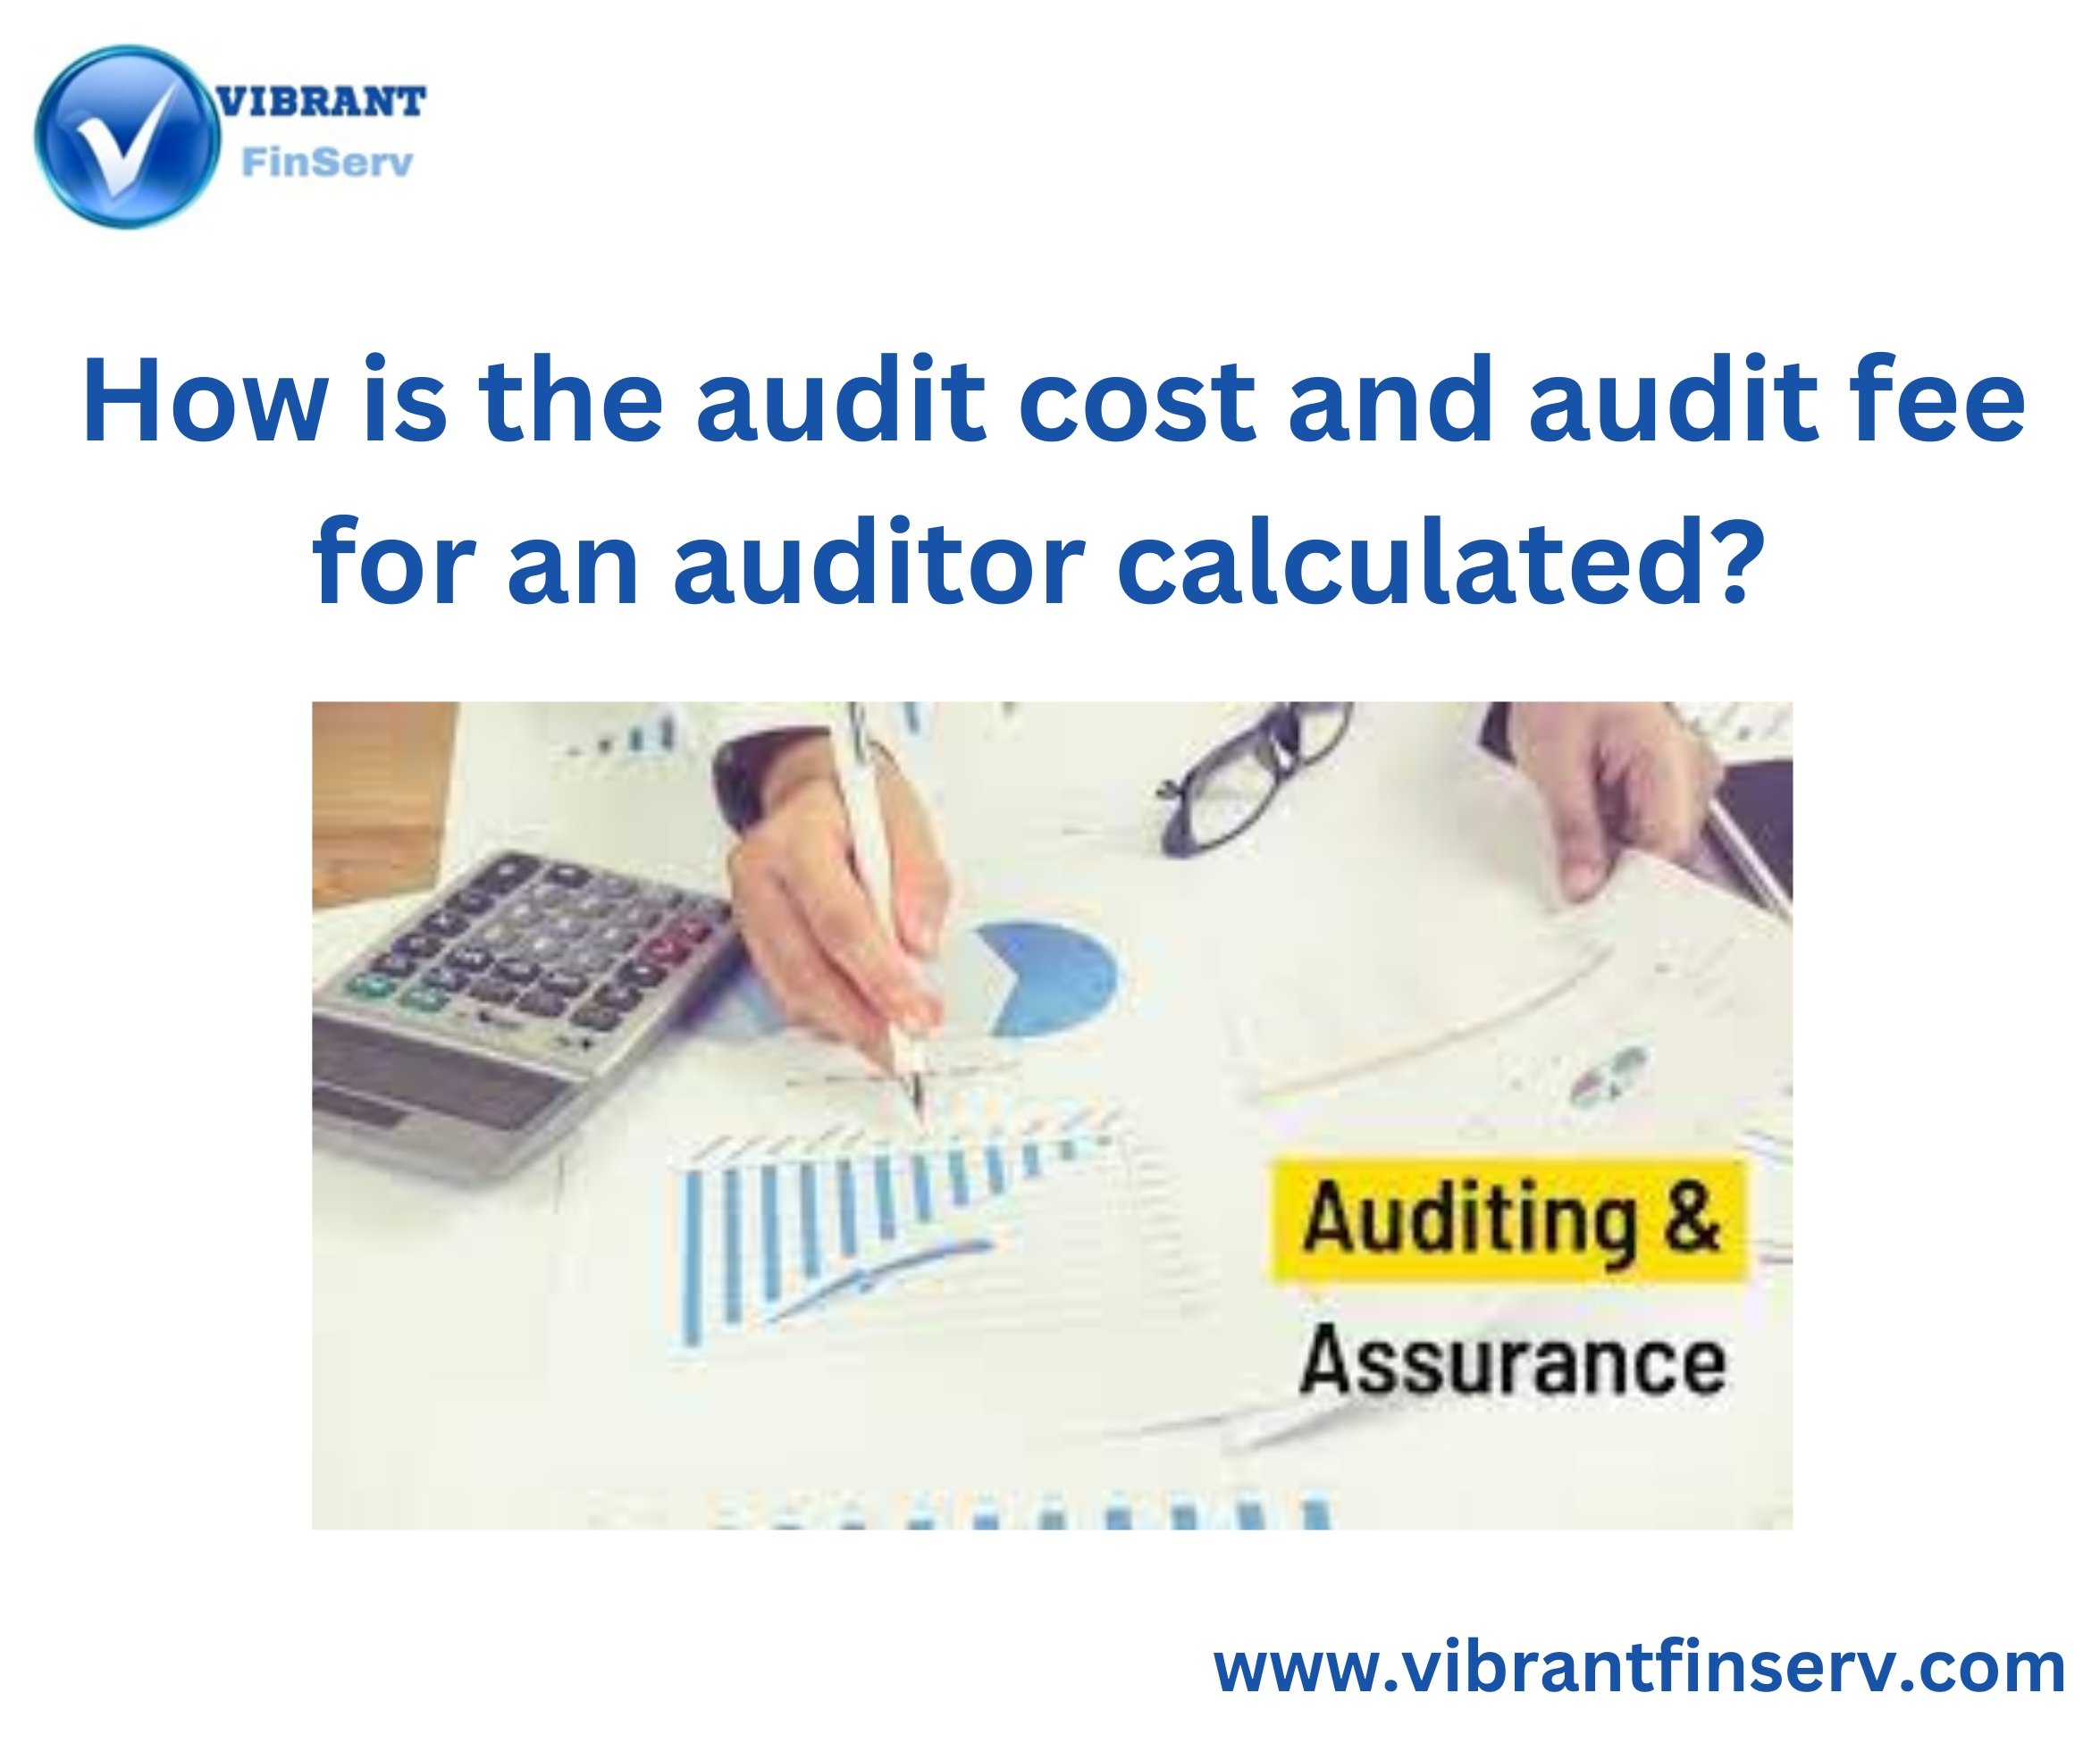 Audit Cost and Audit Fee